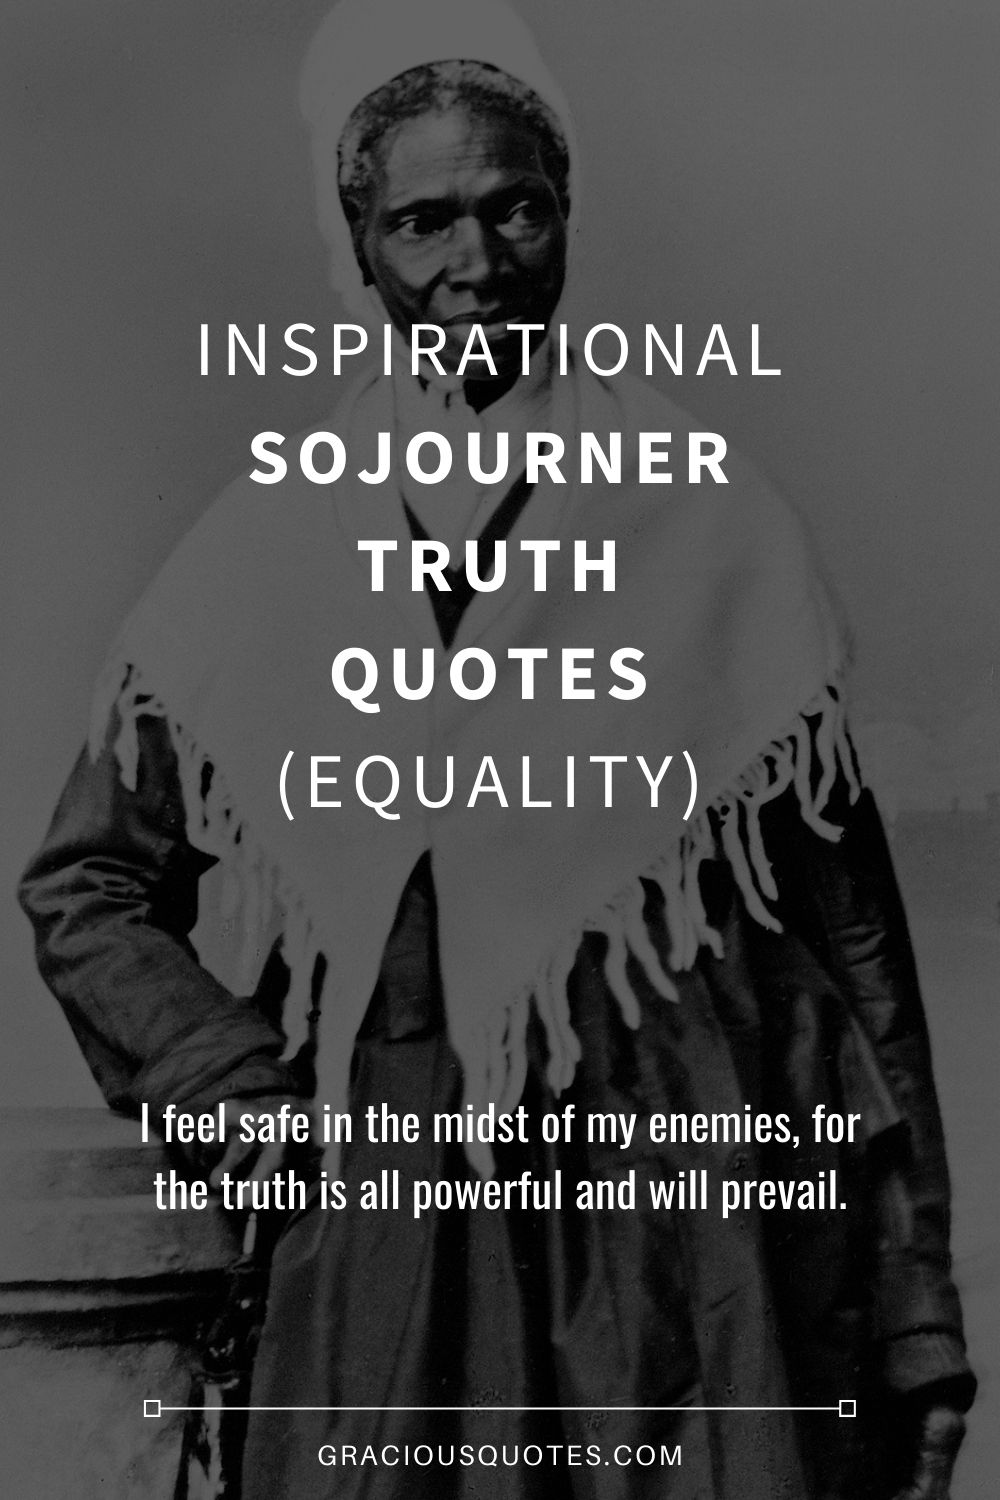 Inspirational Sojourner Truth Quotes (EQUALITY) - Gracious Quotes